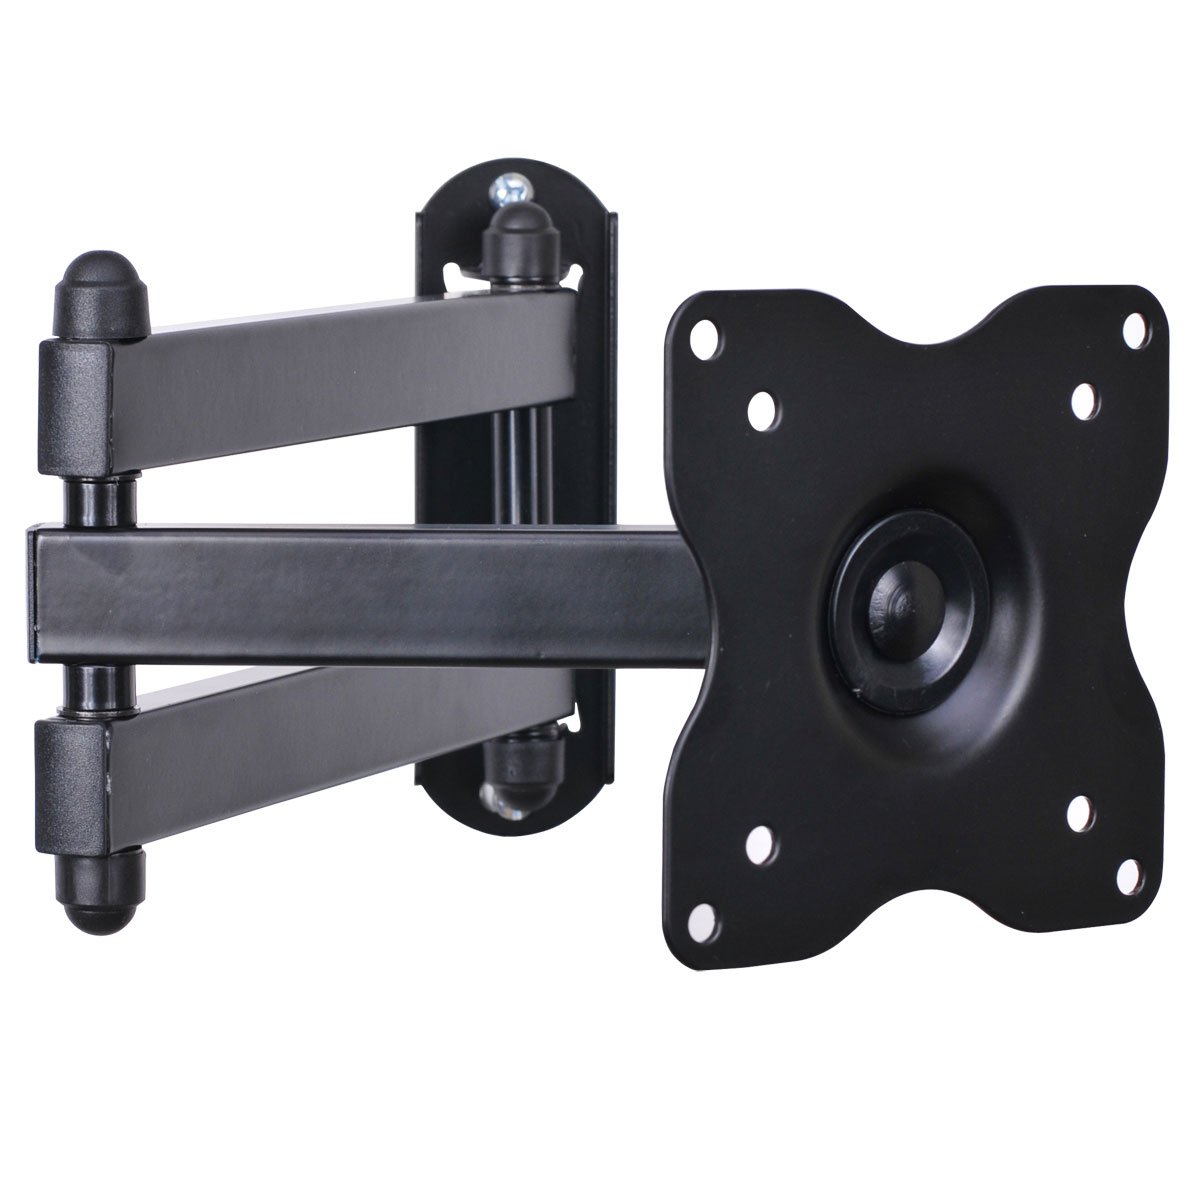 Book Cover VideoSecu ML12B TV LCD Monitor Wall Mount Full Motion 15 inch Extension Arm Articulating Tilt Swivel for Most 19